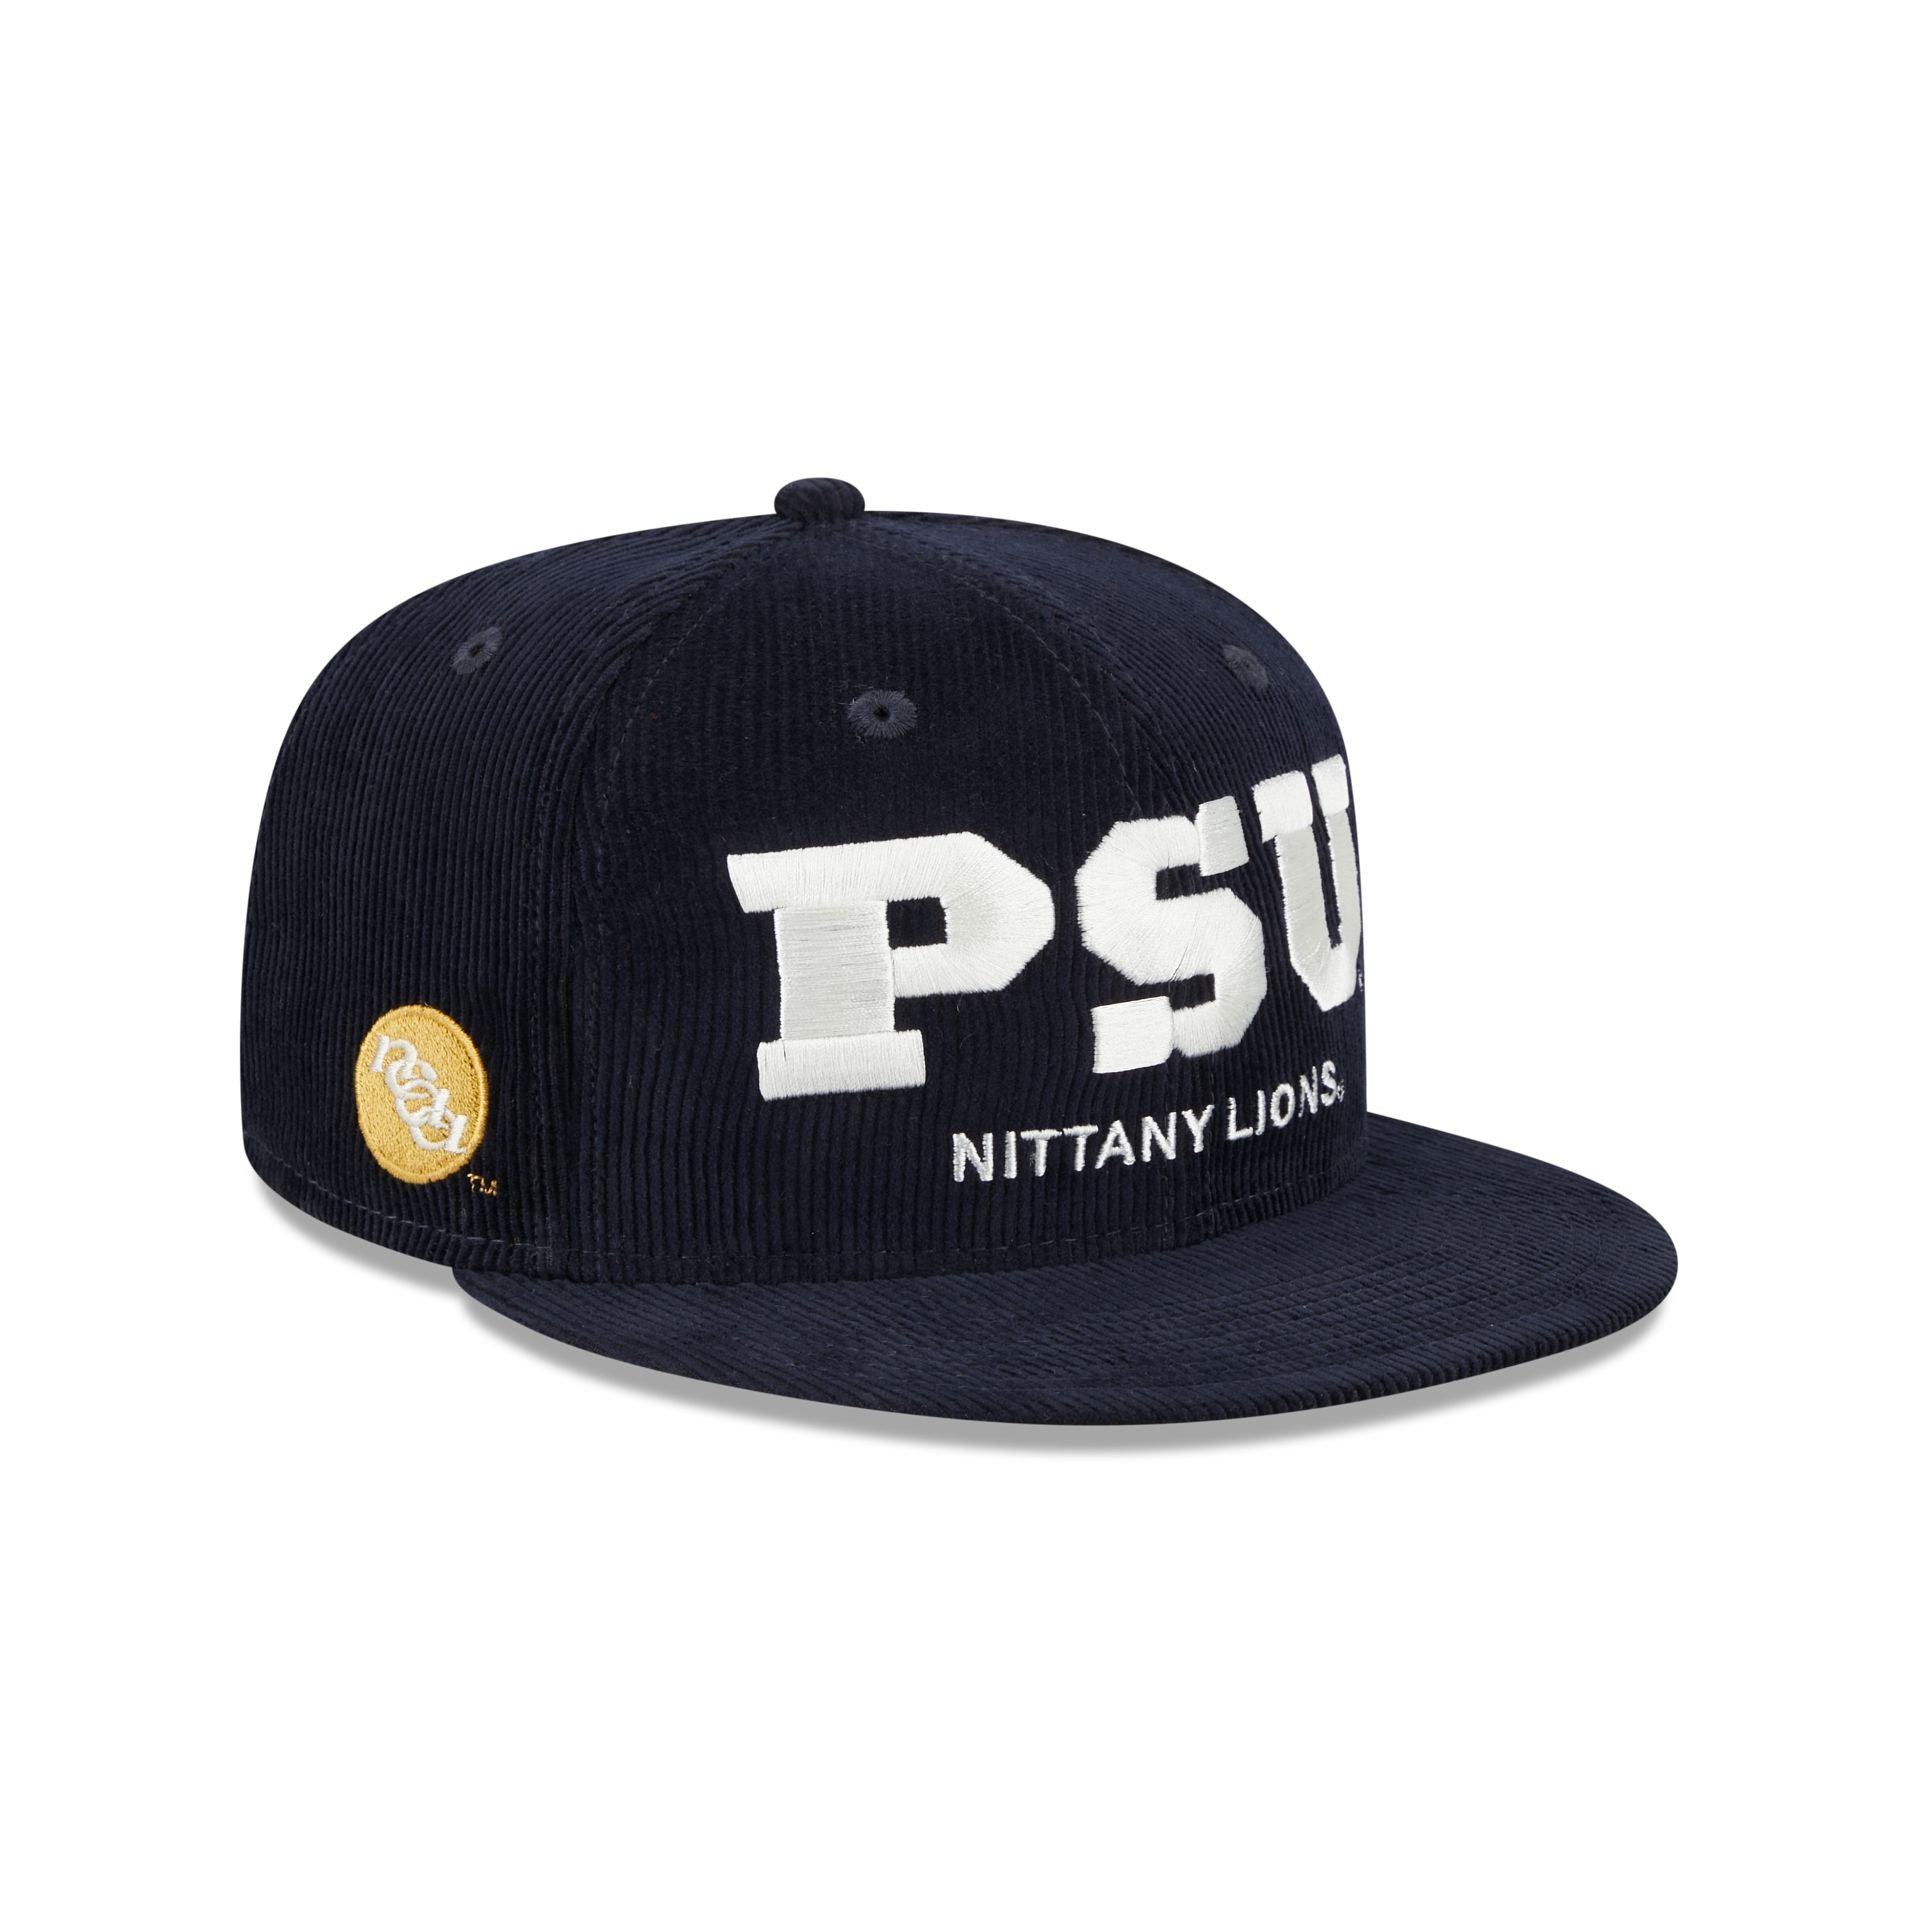 Penn State Nittany Lions Vintage 9FIFTY Snapback Hat – New Era Cap